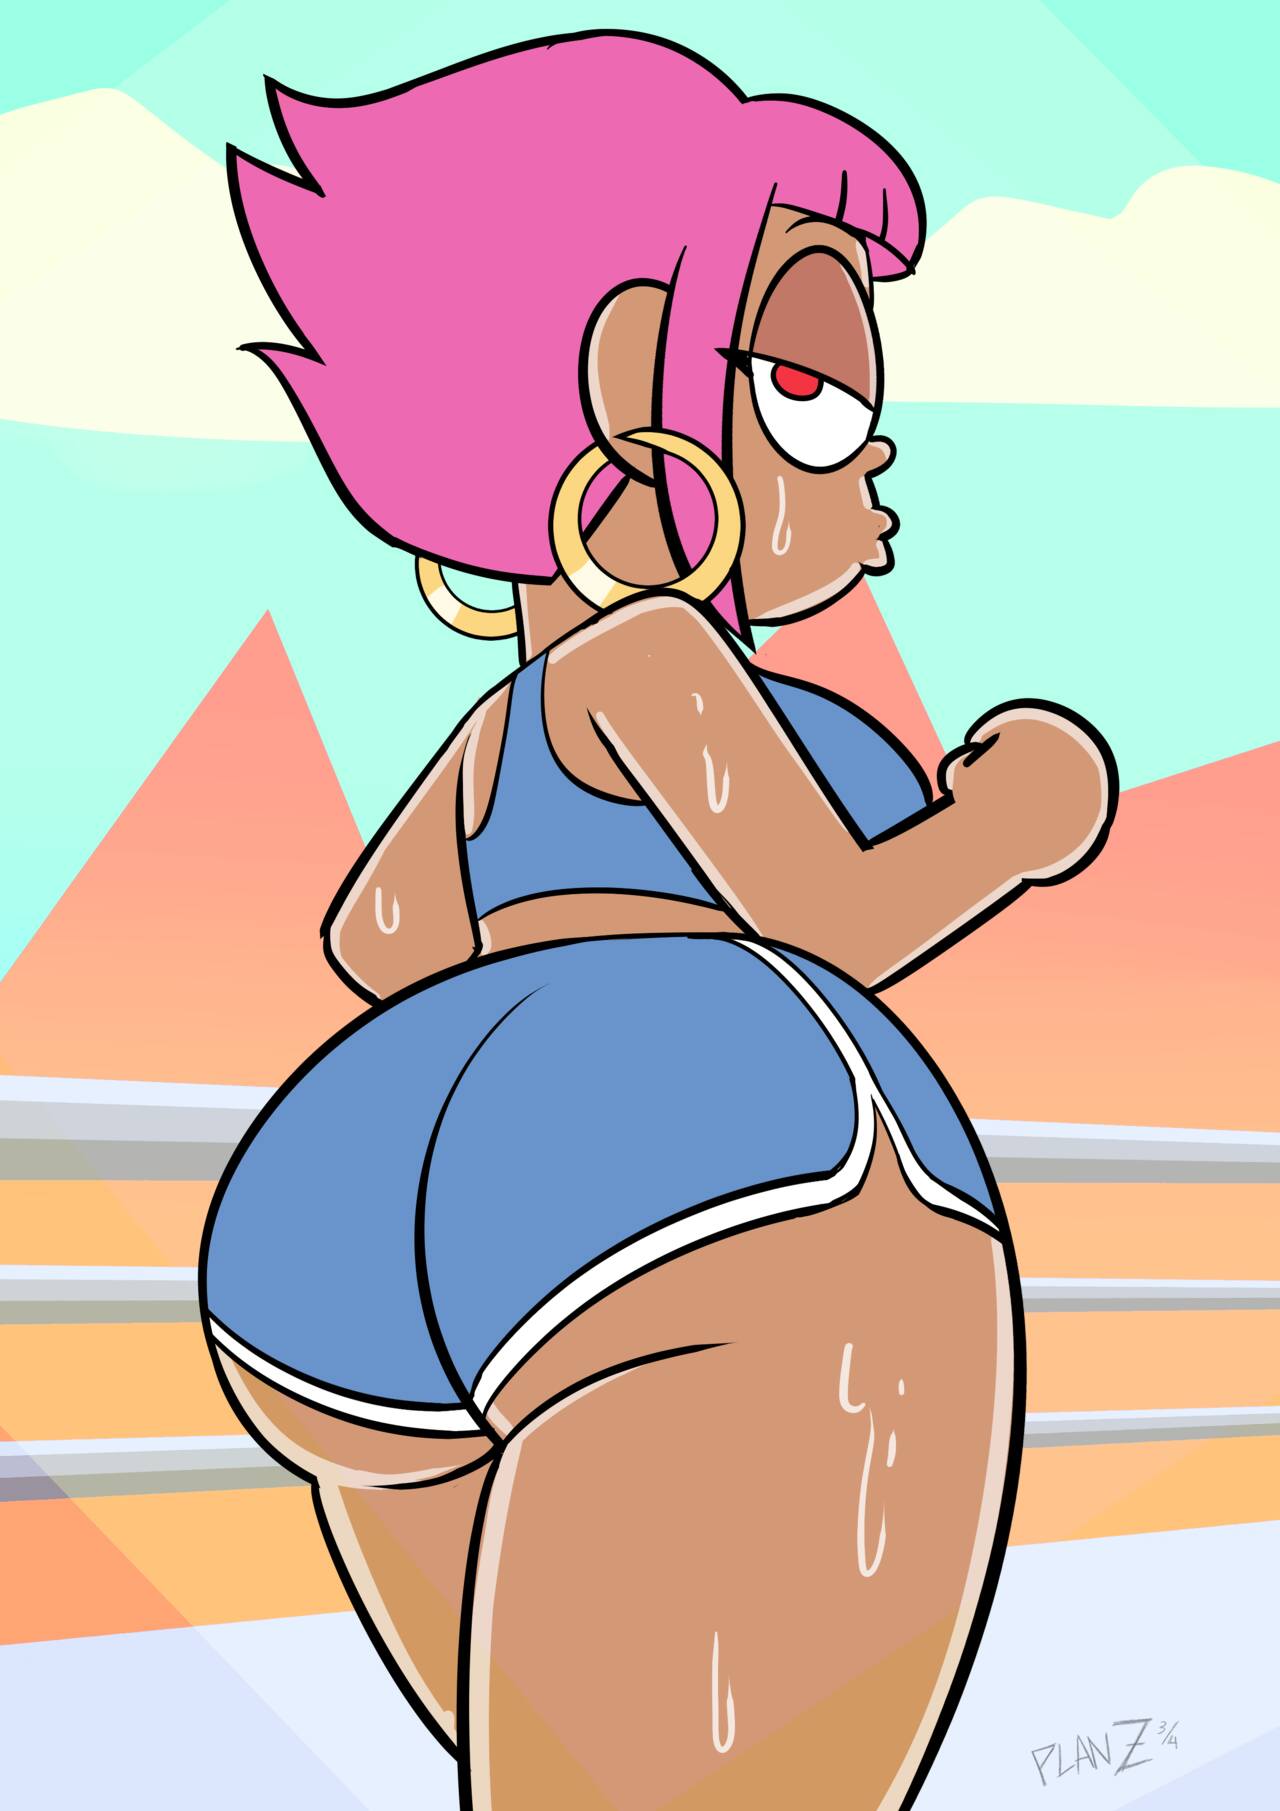 Shannon’s Dyme Days (OK K.O.! Let’s Be Heroes) PlanZ34